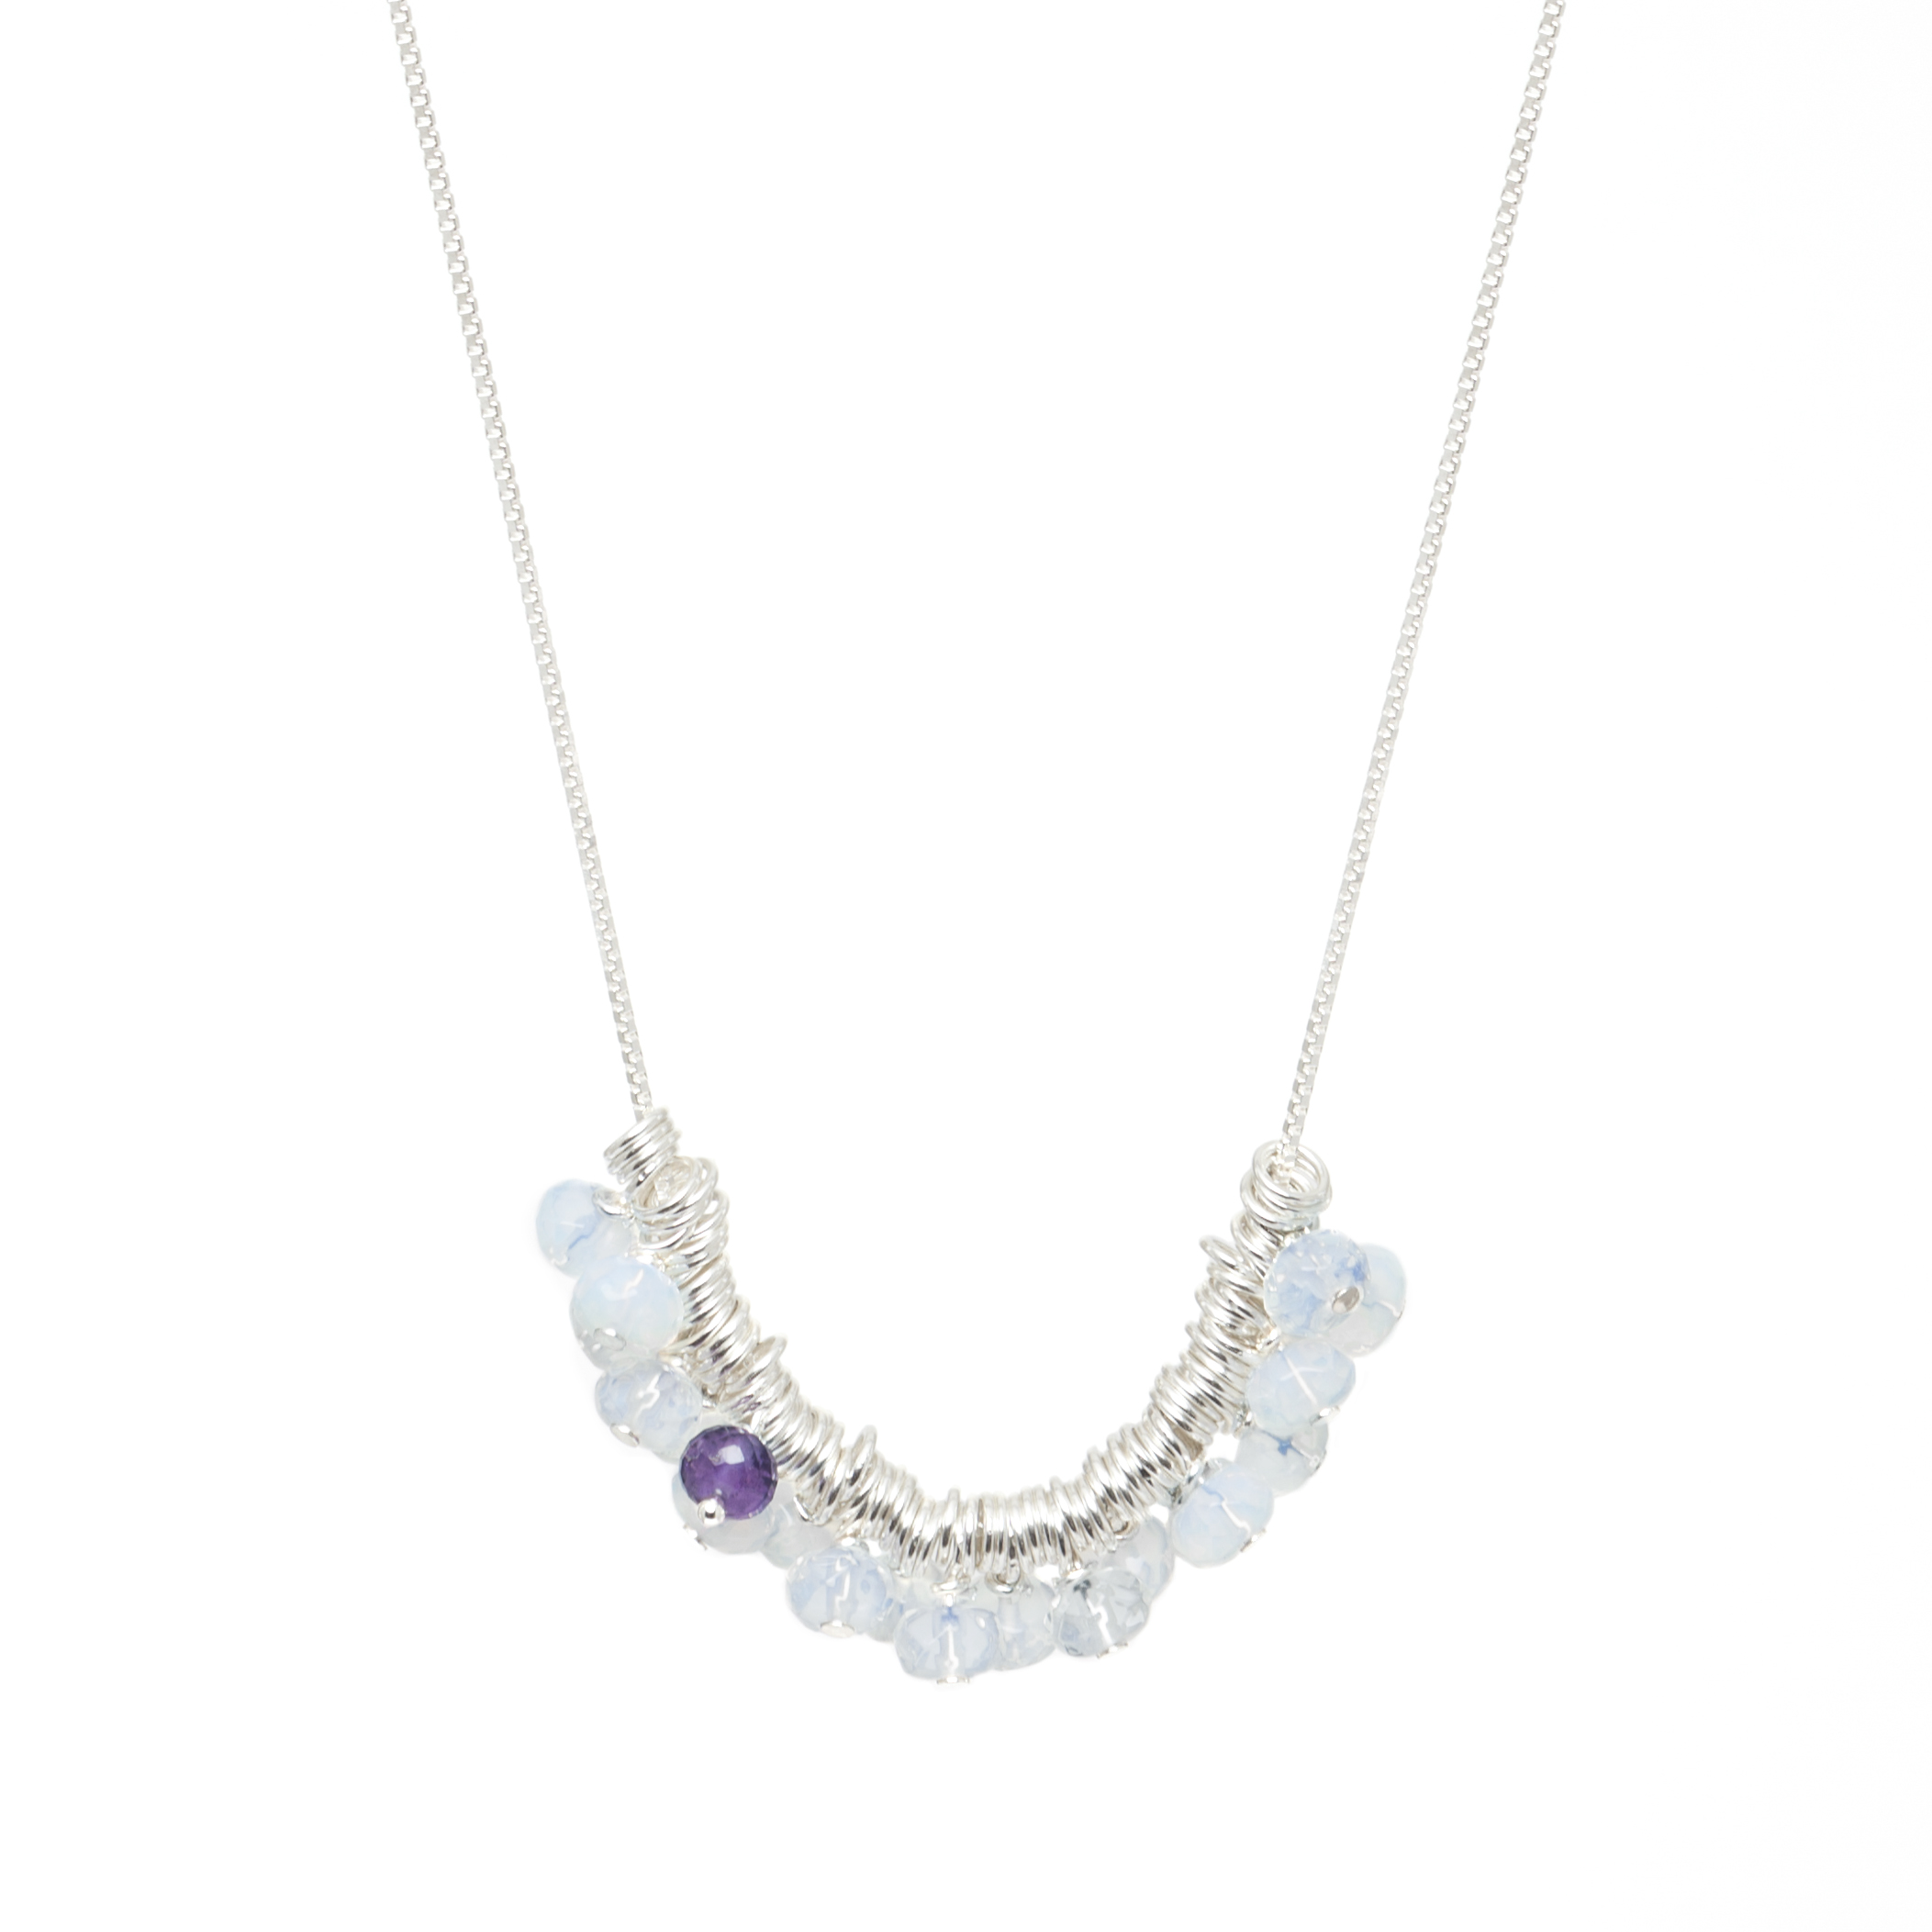 Opal Quartz and Amethyst Sterling Silver Necklace